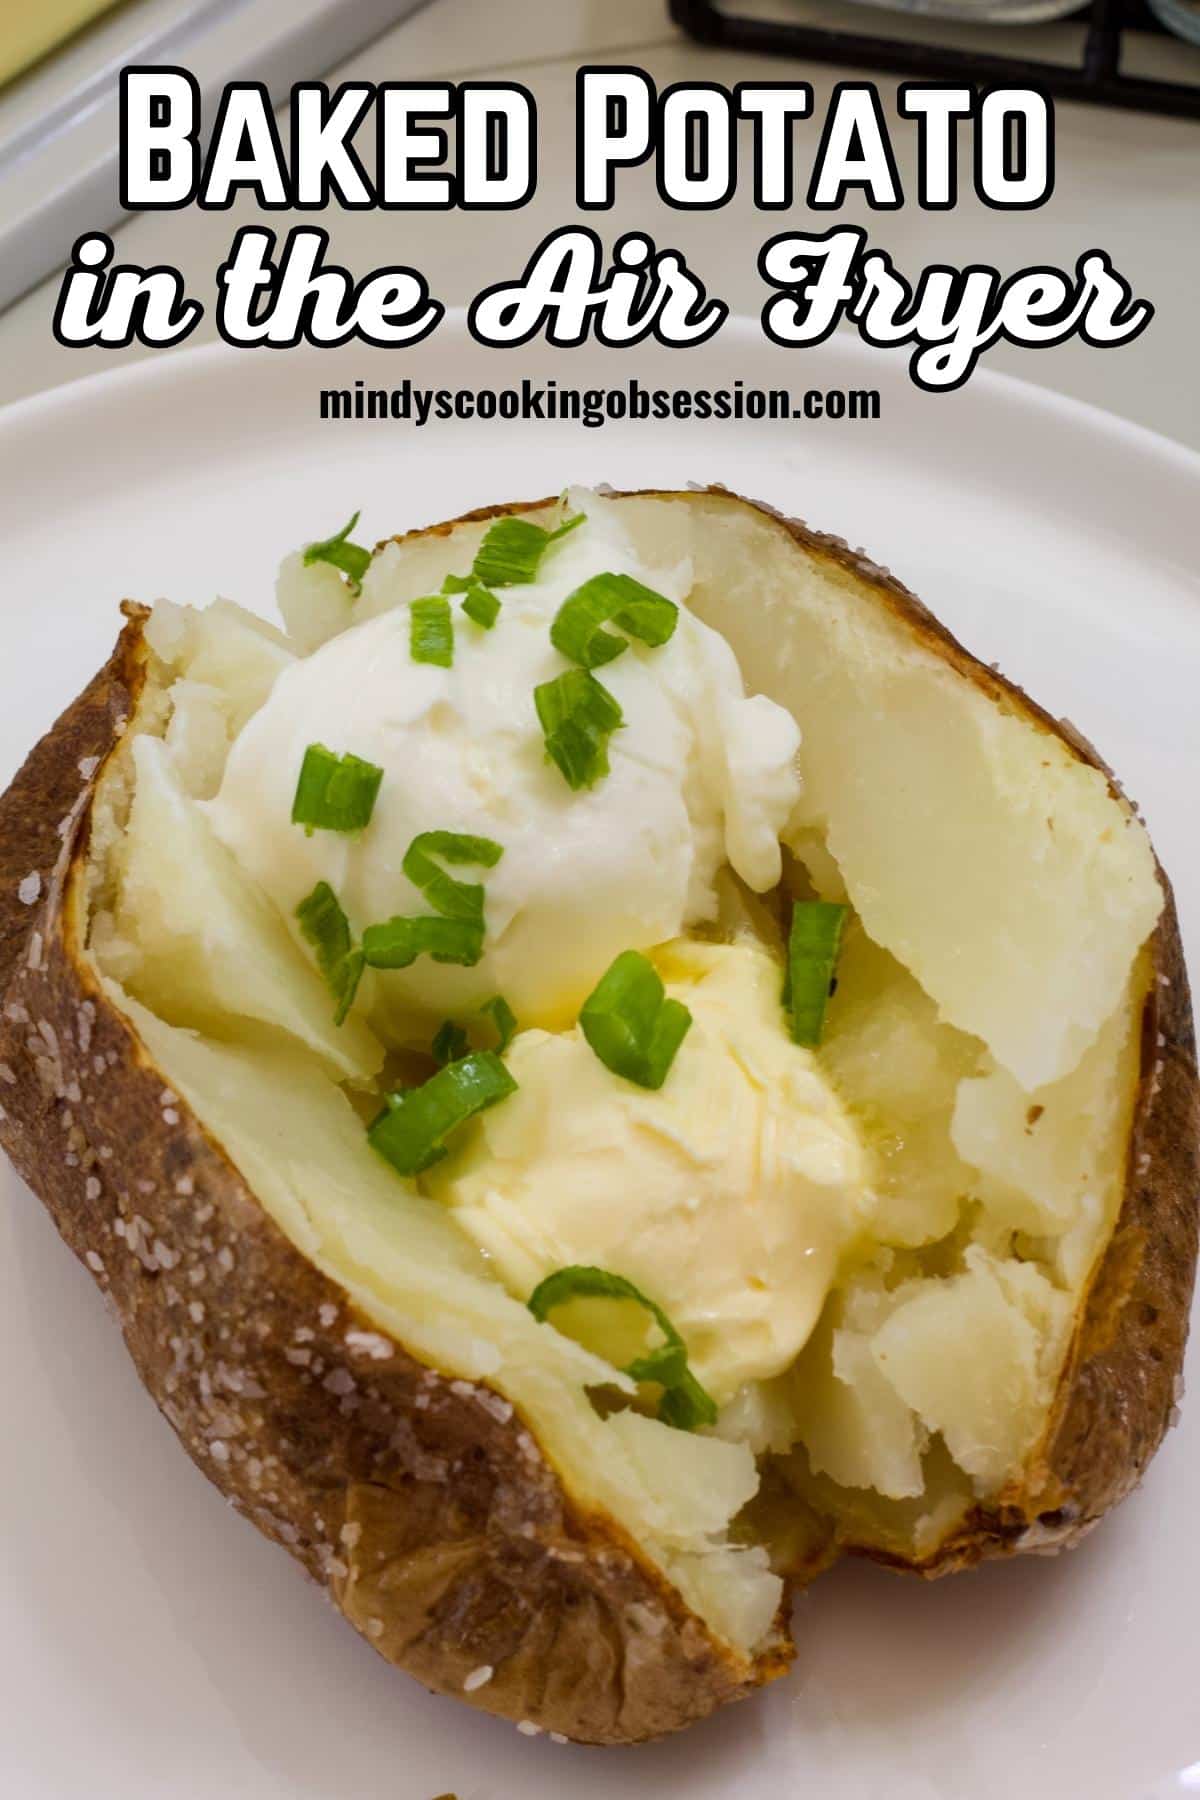 Quick and Easy Air Fryer Baked Potato Recipe - Mindy's Cooking Obsession